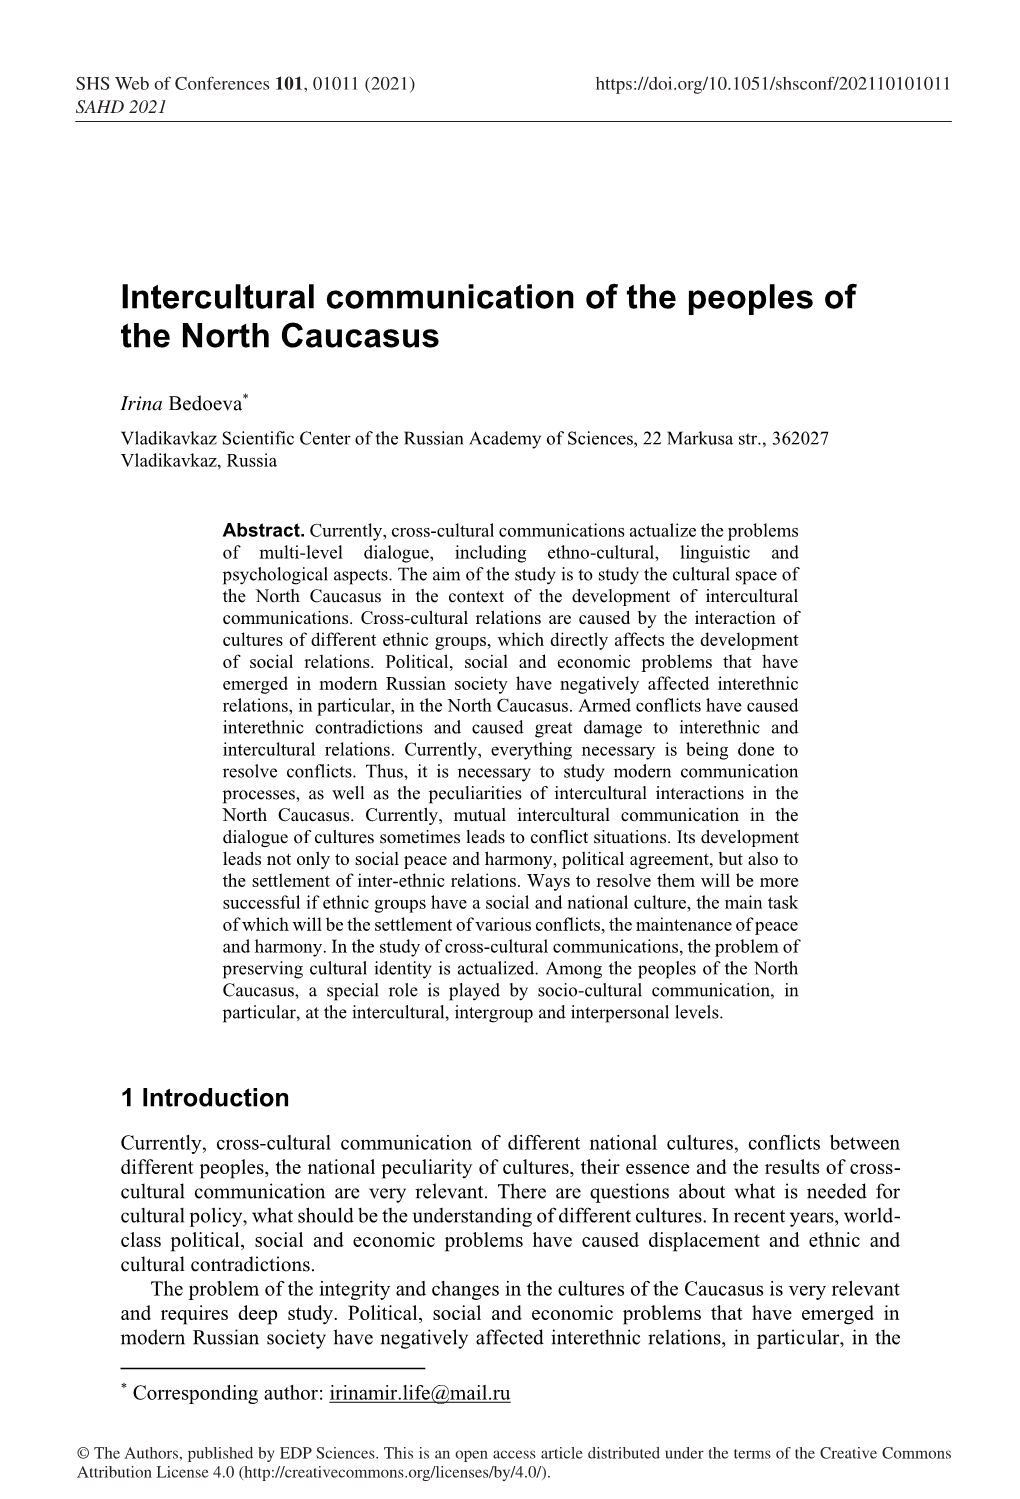 Intercultural Communication of the Peoples of the North Caucasus